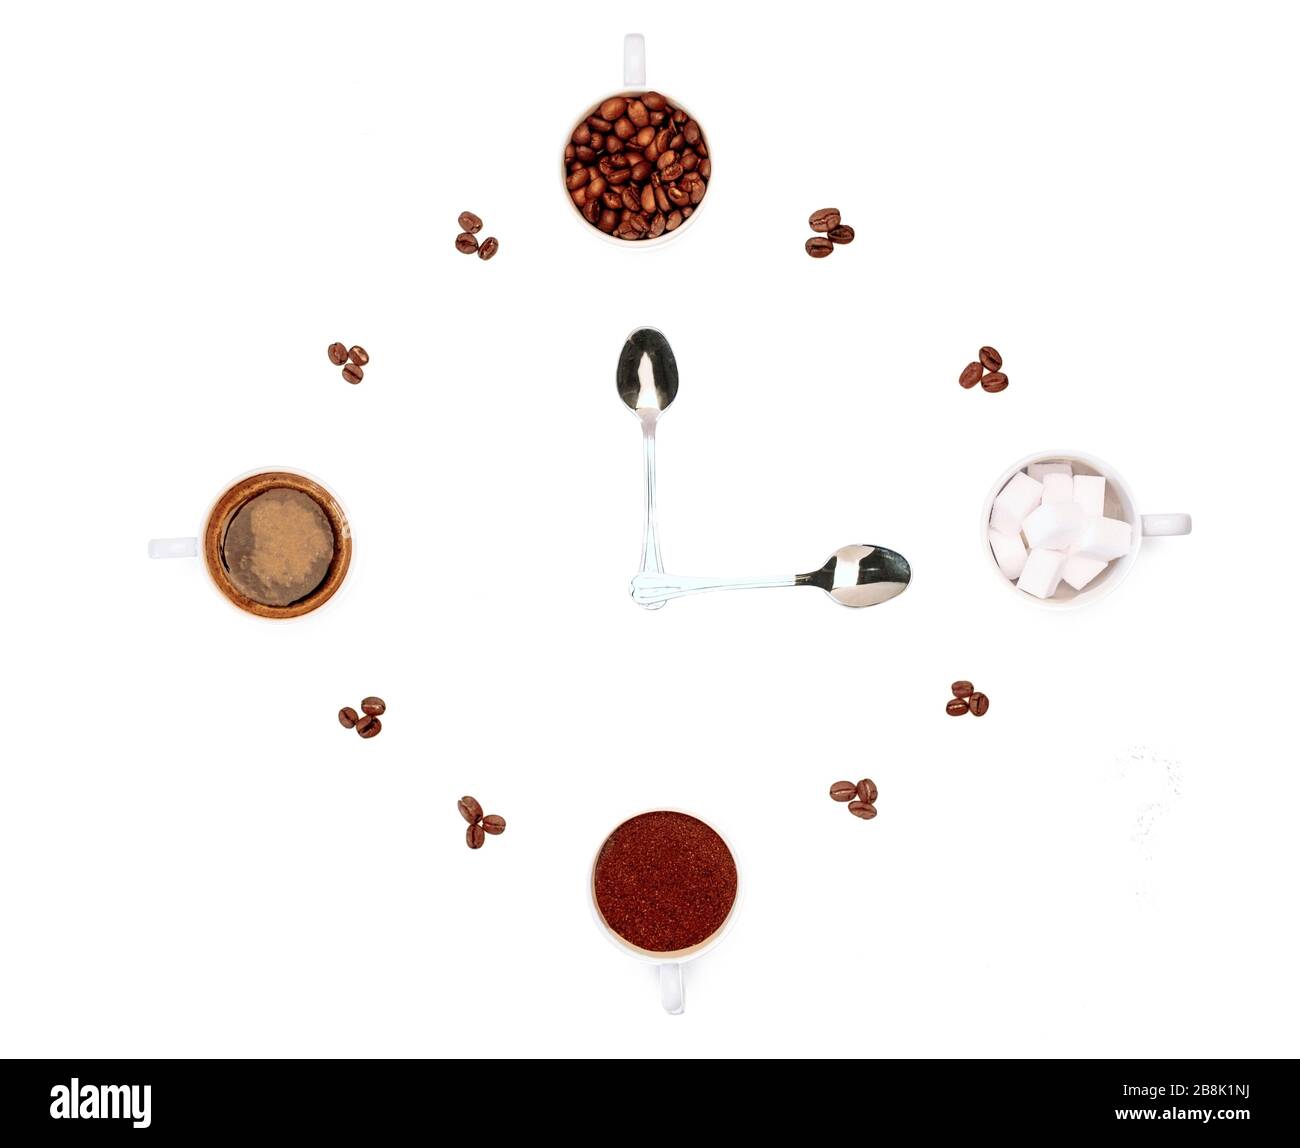 Creative still lifes of coffee and its ingredients drawing a clock Stock Photo